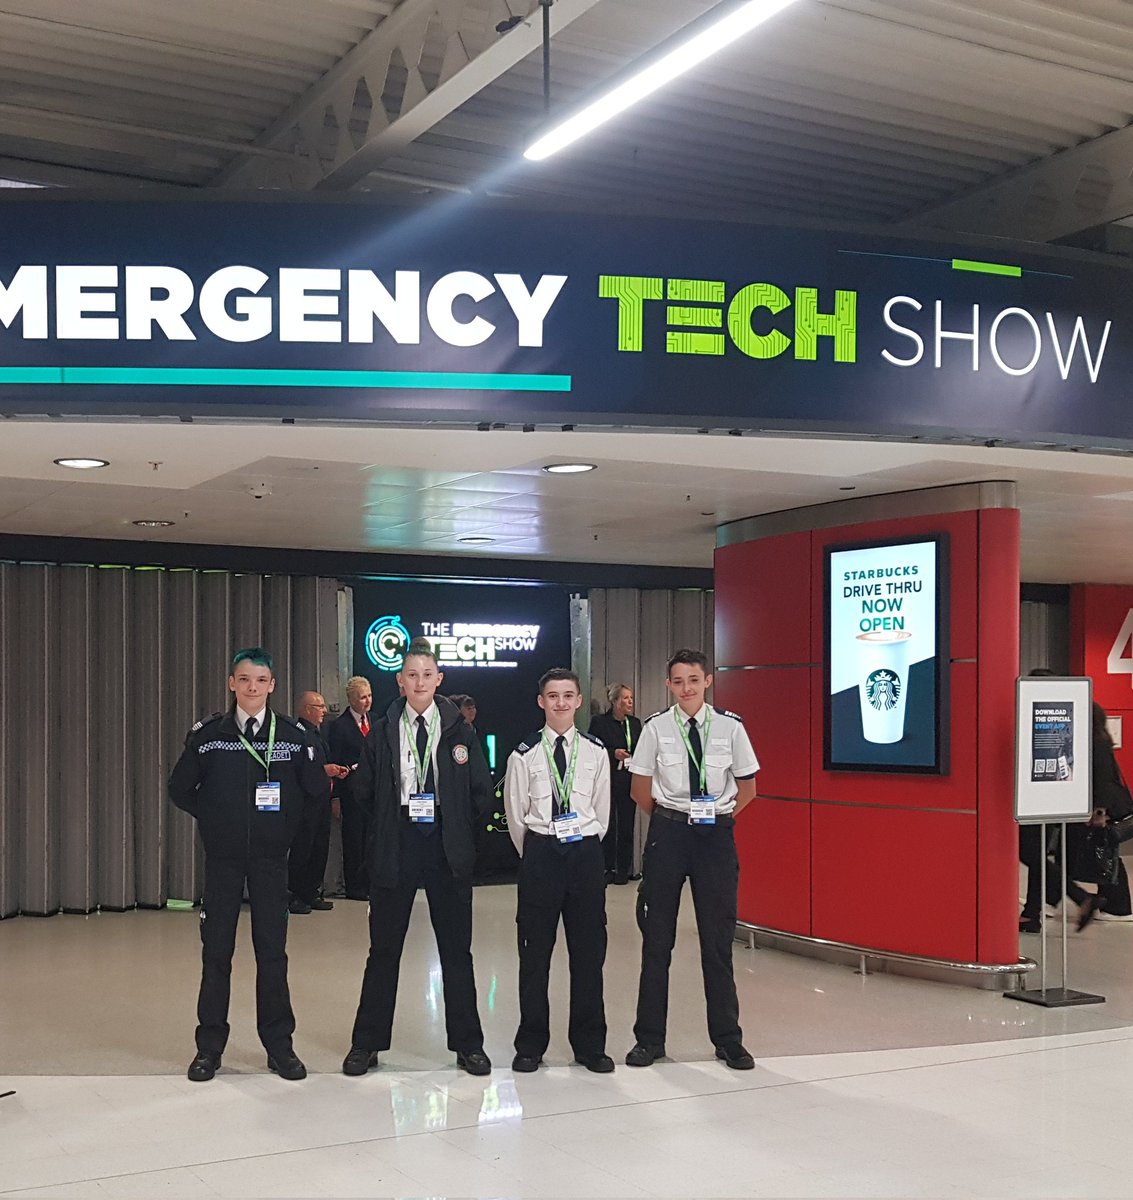 Northampton and Towcester cadets and staff are at the NEC for the Emergency Services Show @annmarielawson1 @NorthantsChief @McguinnessStaff